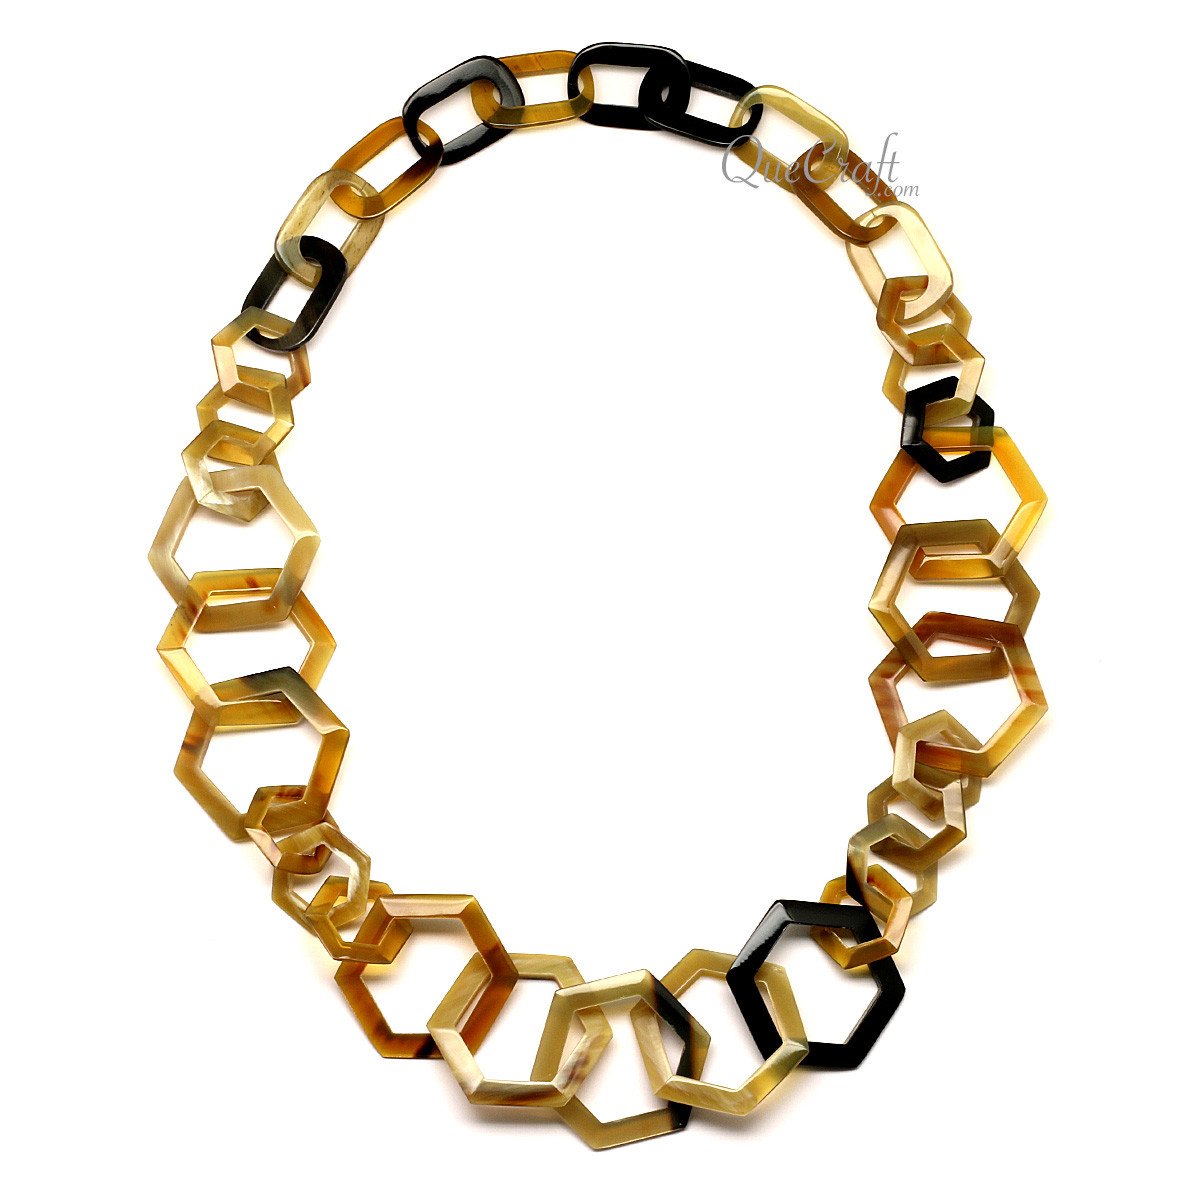 Horn Chain Necklace #12622 - HORN JEWELRY